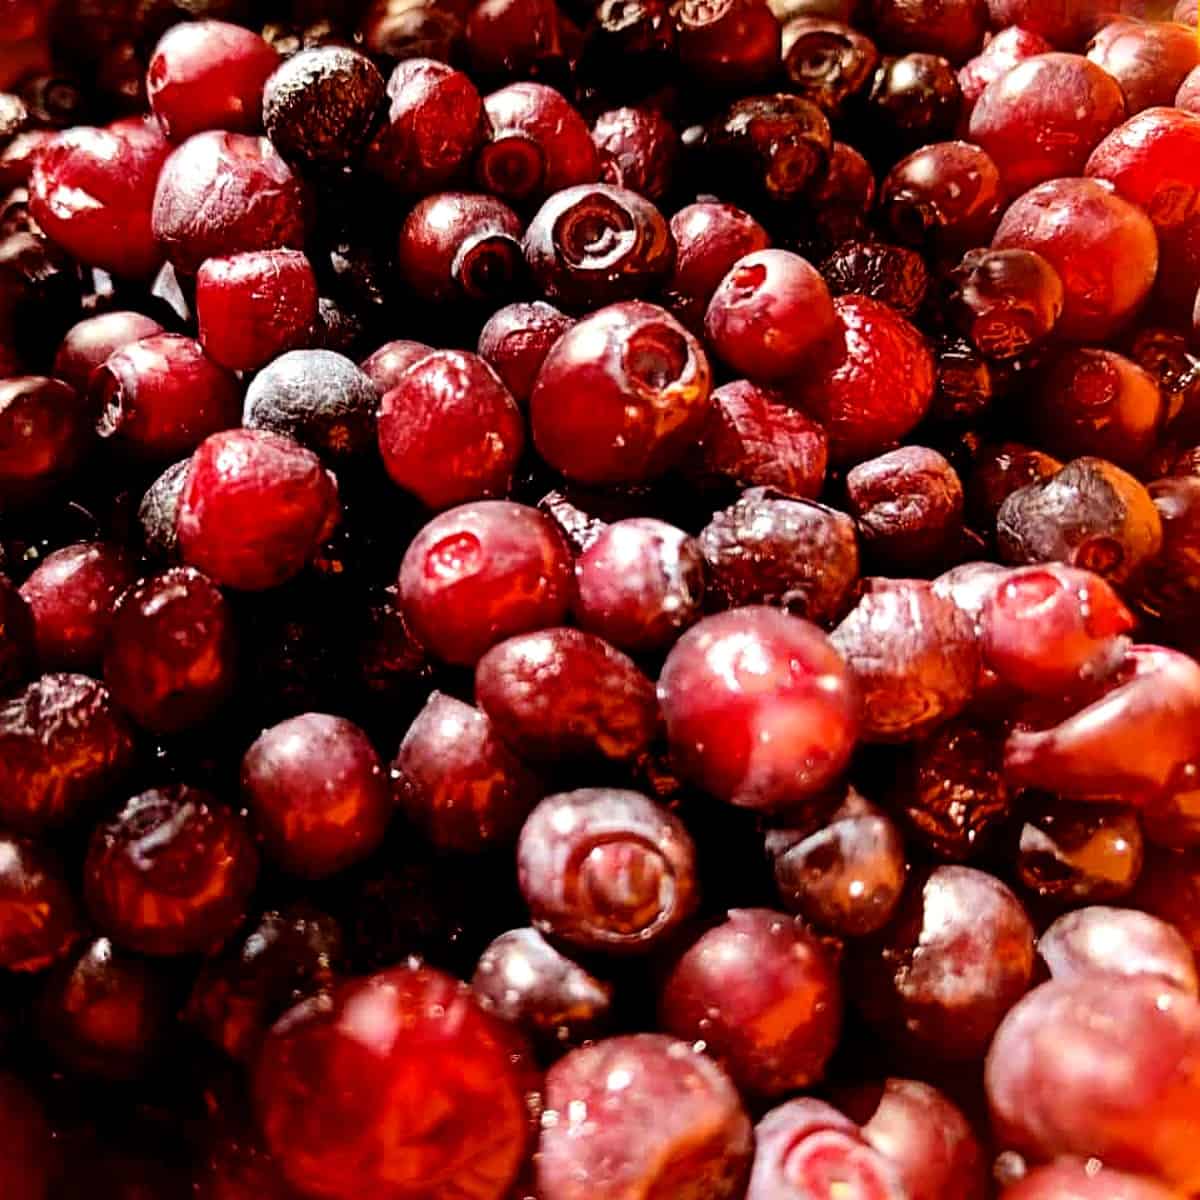 freshly picked and washed huckleberries